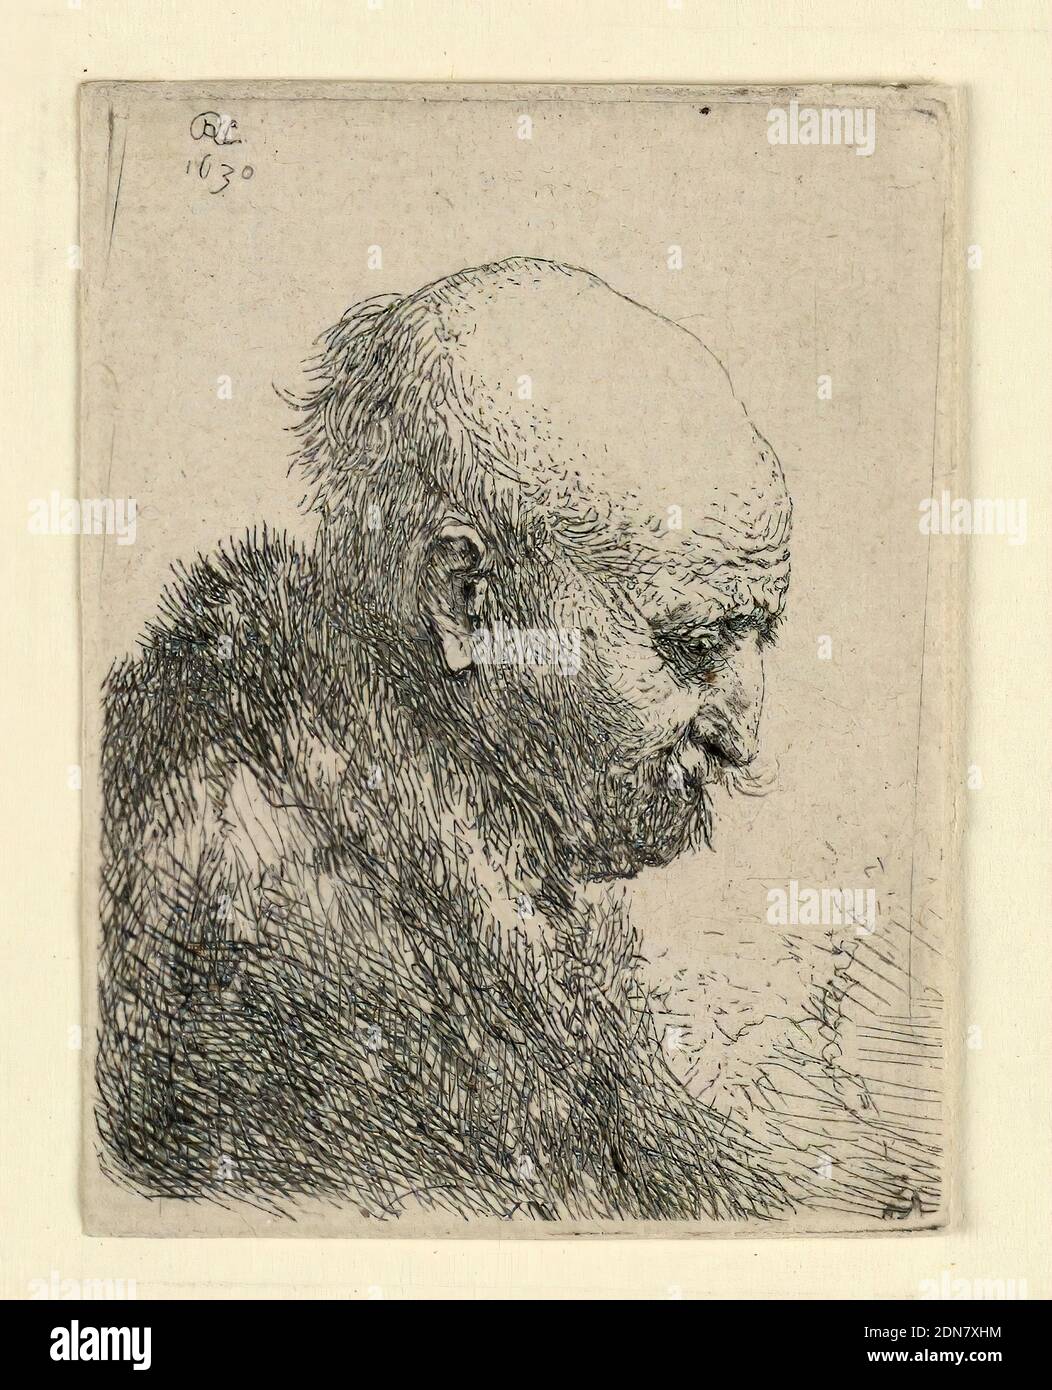 Bald-Headed Man in Profile Right: Small Bust; The Artist's Father?, Rembrandt Harmensz van Rijn, Dutch, 1606–1669, Etching on laid paper, Head of an old man, facing right in profile., Netherlands, 1630, Print Stock Photo